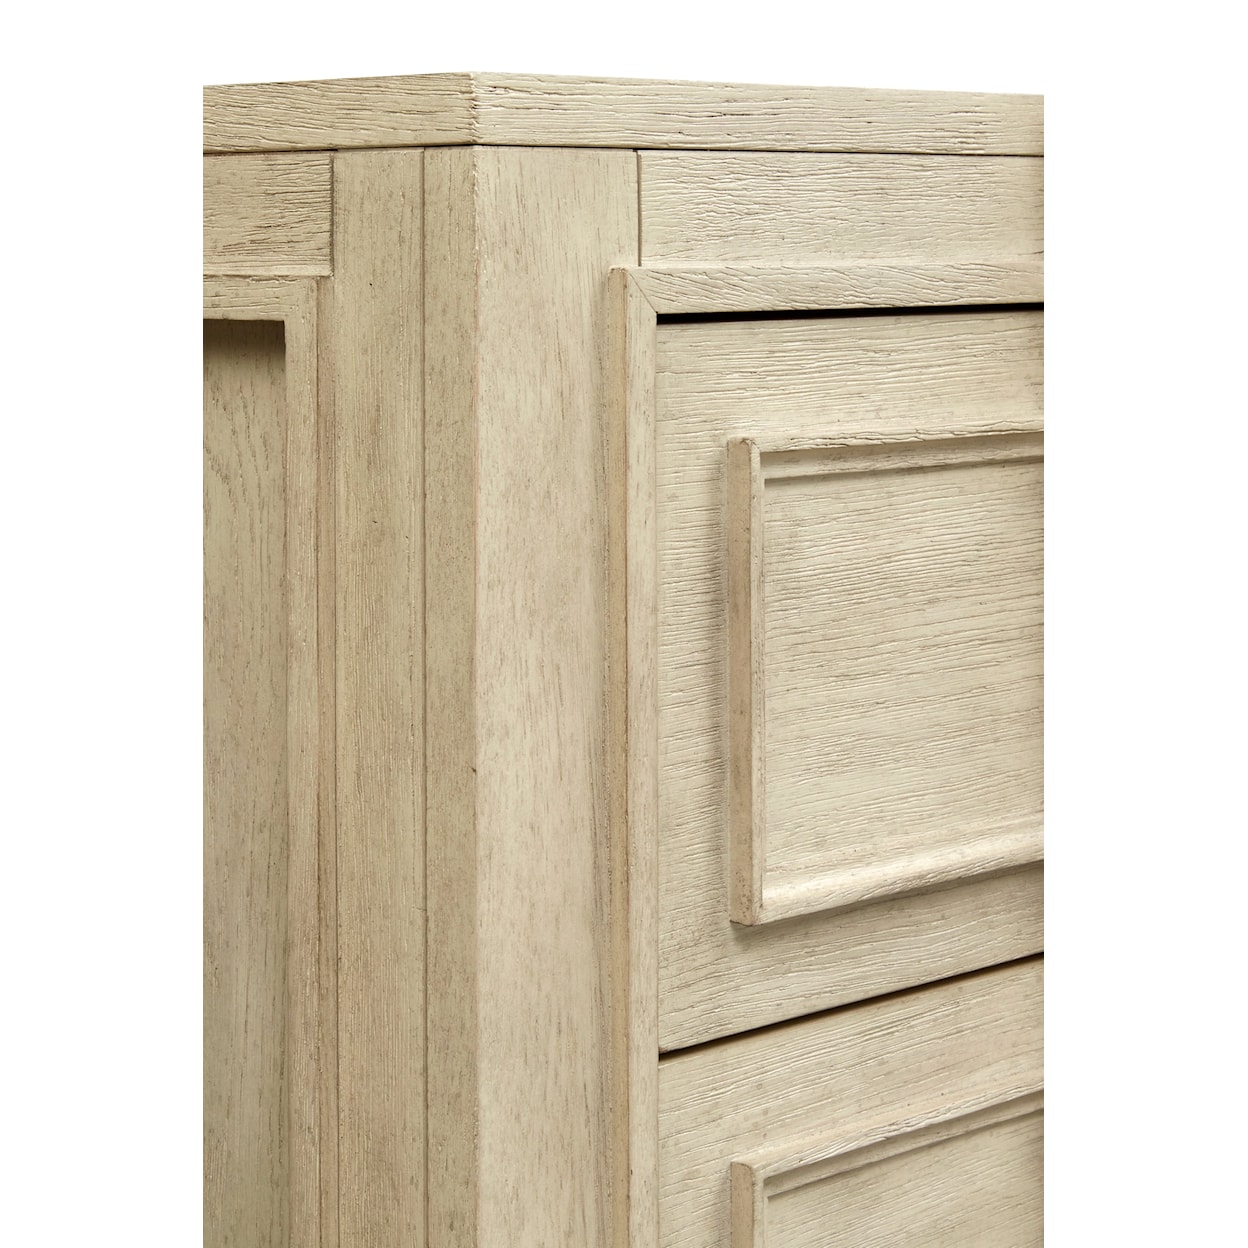 Magnussen Home Sheridan Bedroom Chest of Drawers